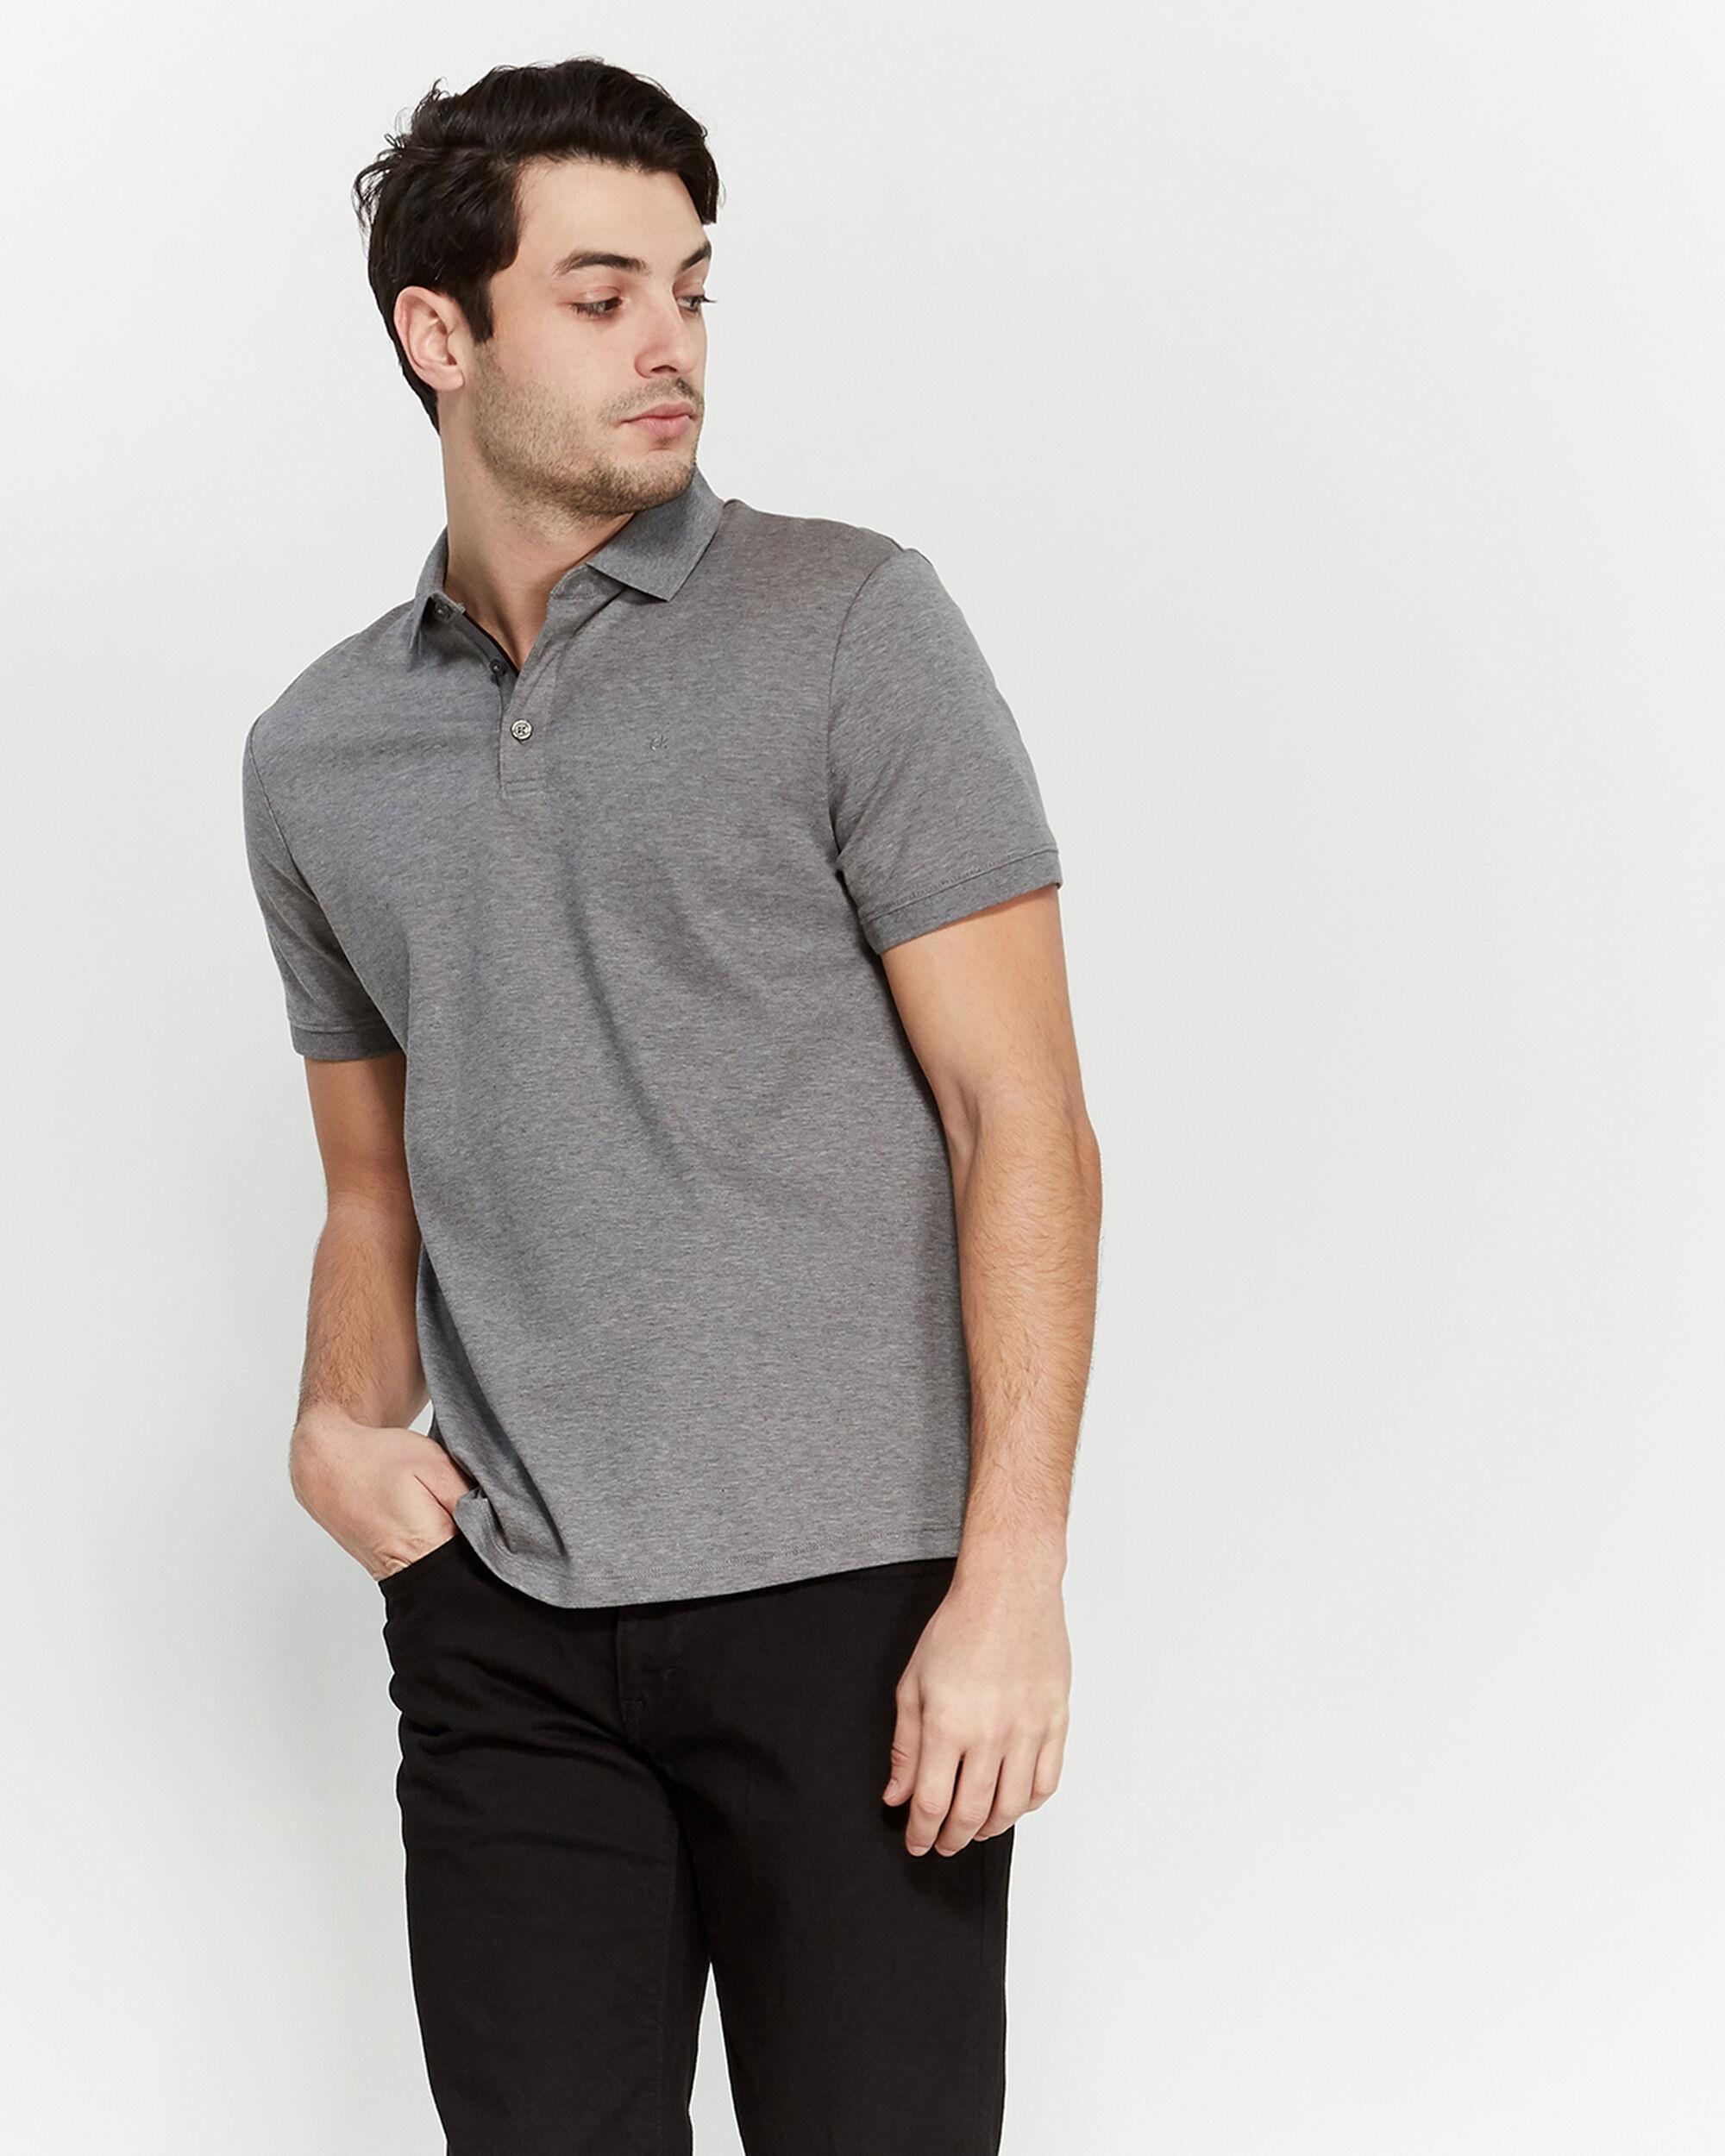 Calvin Klein Cotton The Liquid Touch Polo in Gray for Men - Lyst